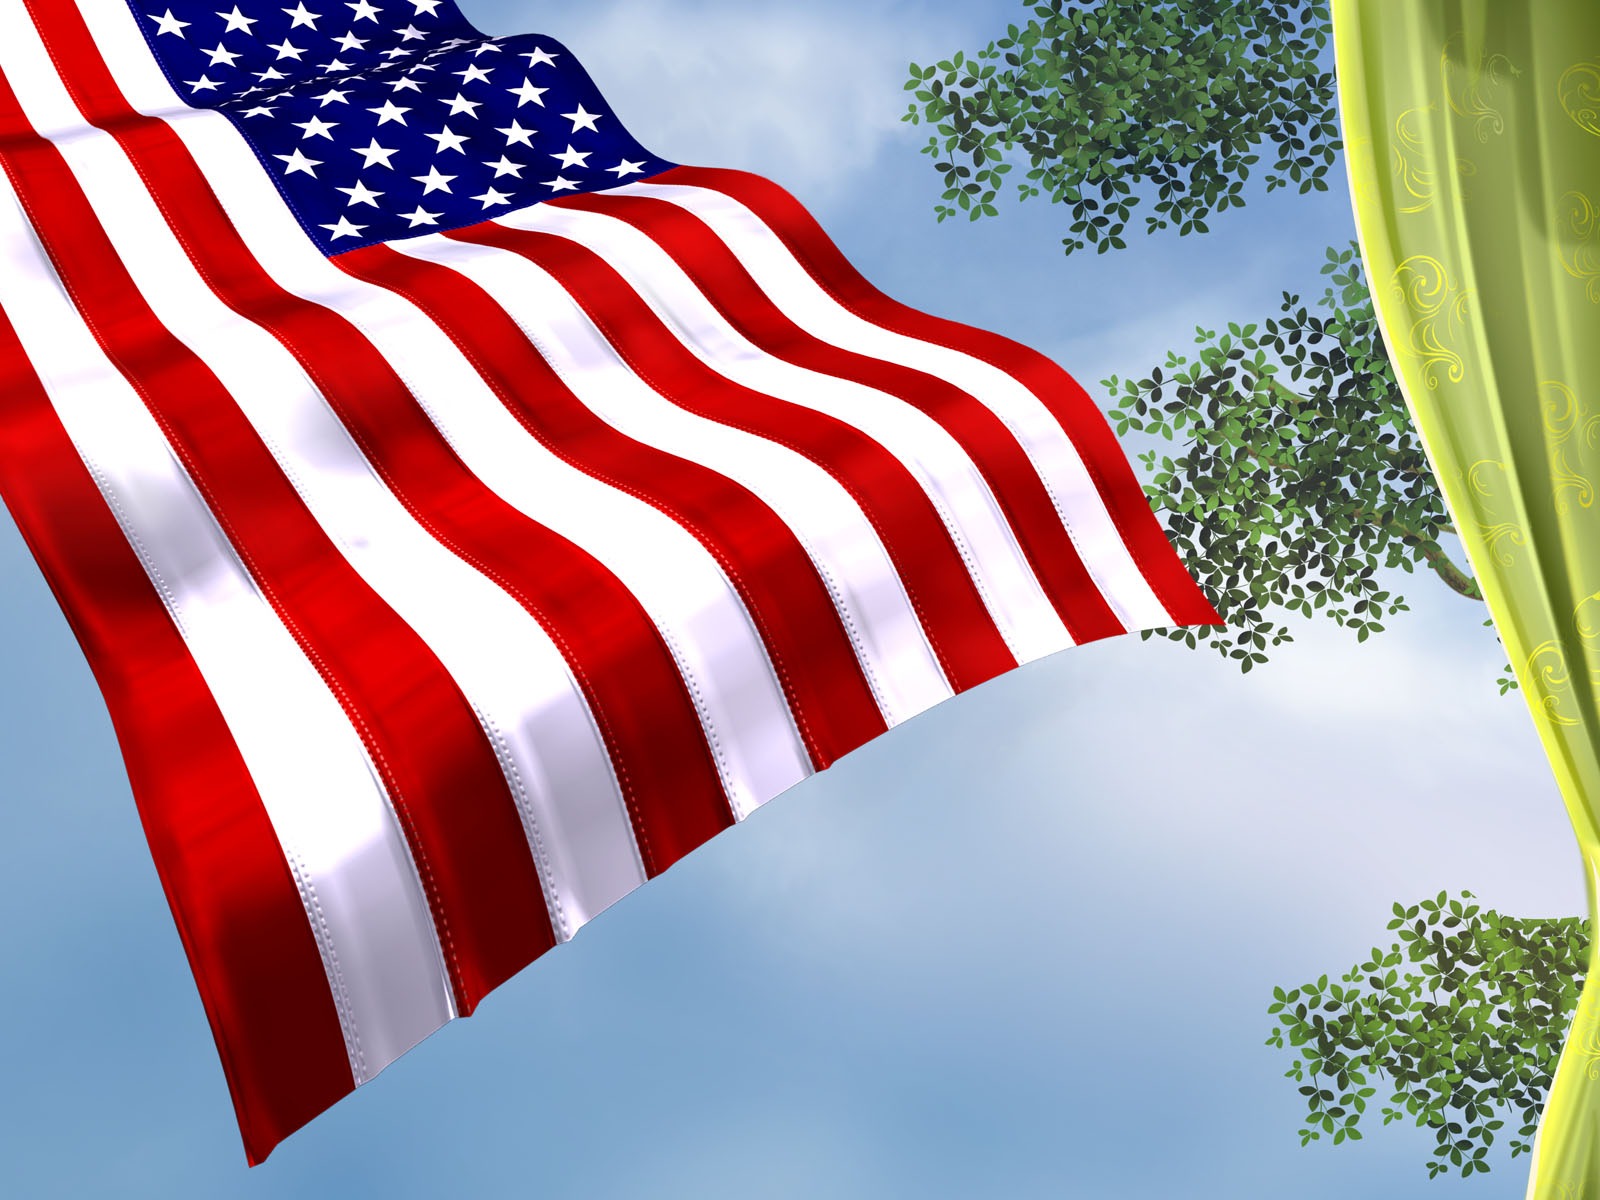 U.S. Independence Day theme wallpaper #33 - 1600x1200